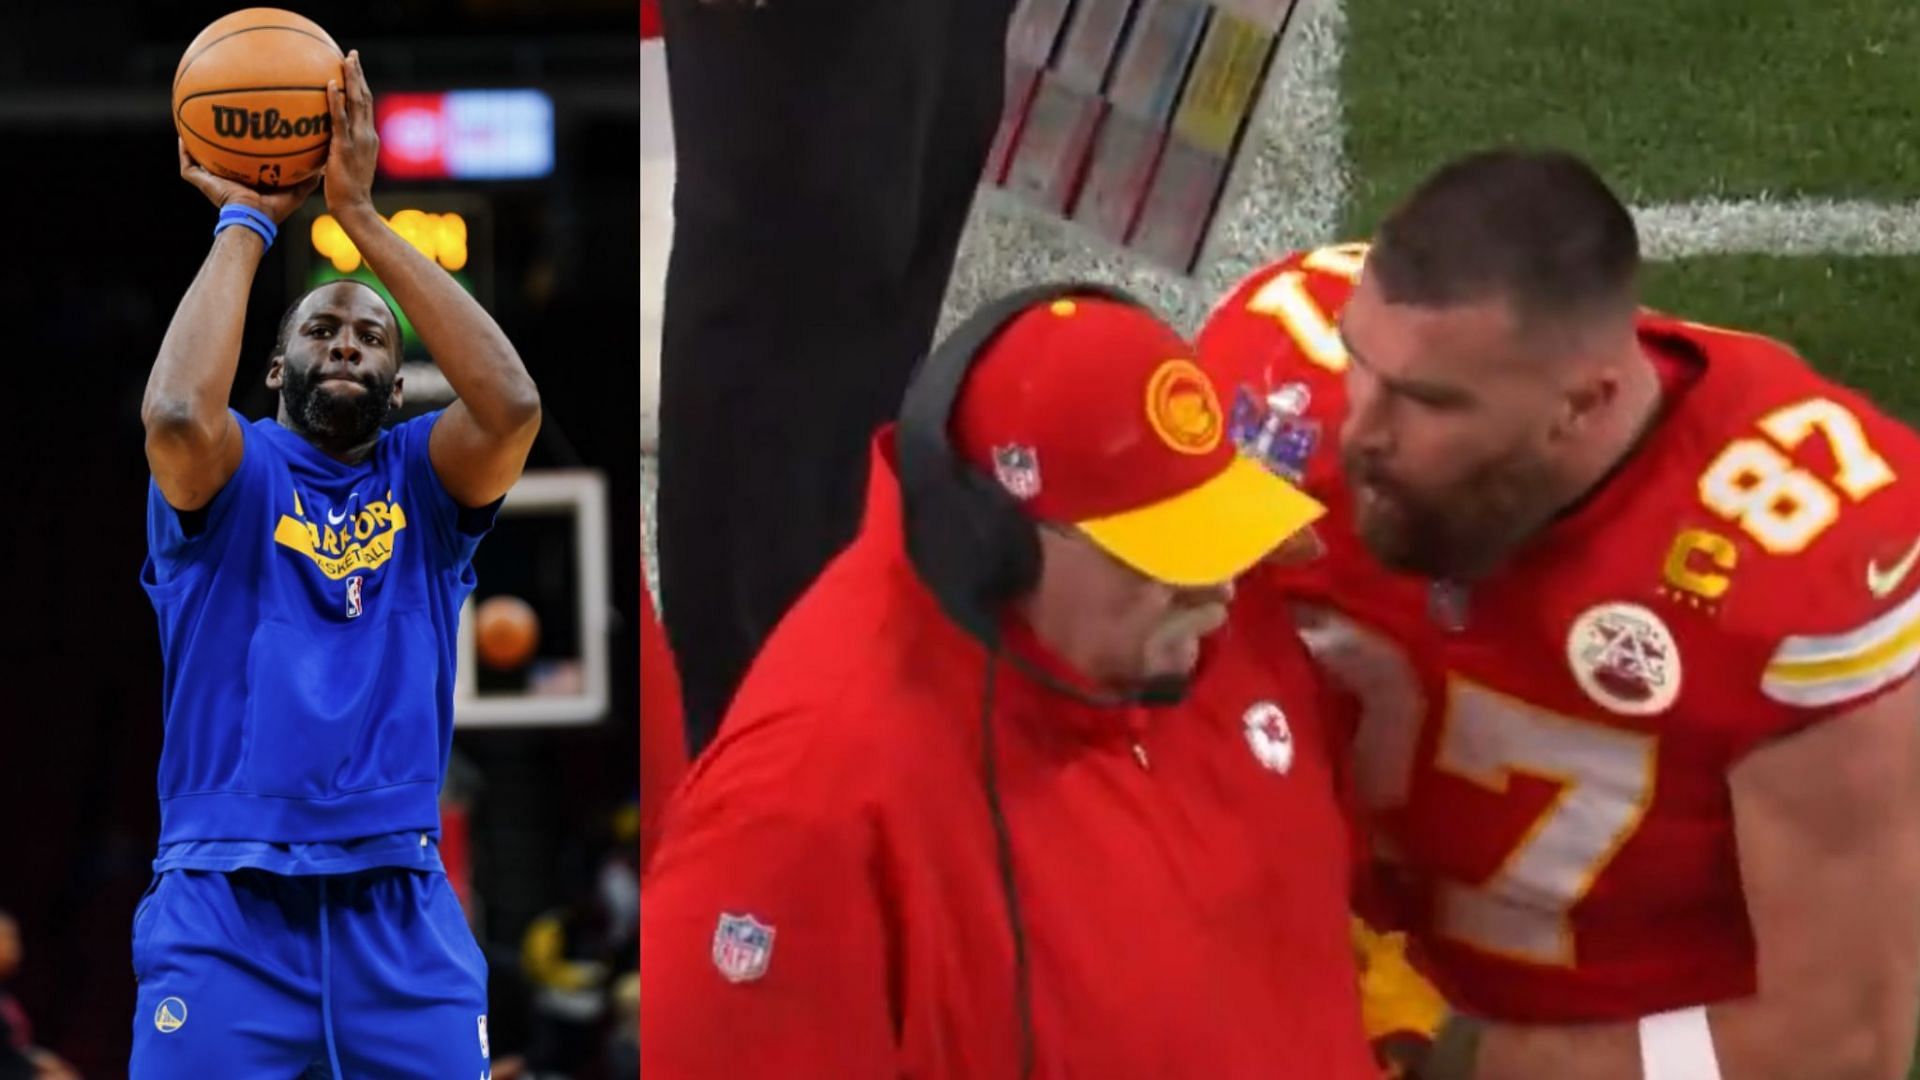 NBA fans compare Travis Kelce to Draymond Green after Chiefs star